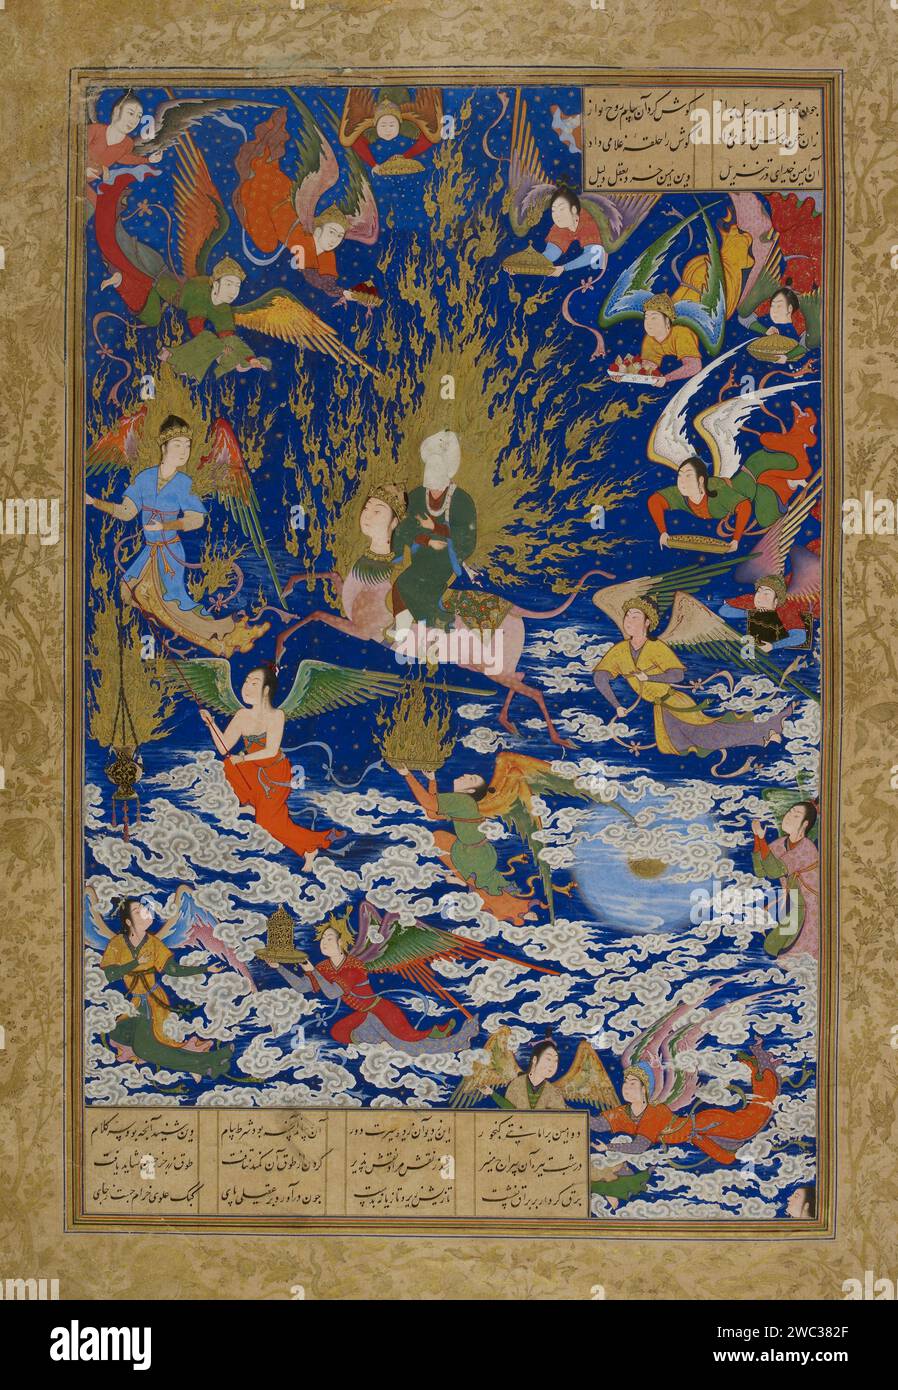 Title: The Ascent of the Prophet Mohammed on his Mount, Buraq Artist: Aqa Mirak Year: 1543 Medium: Miniature painting Dimensions: Not specified Location: British Library, London, UK  'The Ascent of the Prophet Mohammed on his Mount, Buraq,' a masterpiece by Aqa Mirak, is a miniature painting dating back to 1543. This artwork is a representation of the Mi'raj and is part of a sixteenth-century version of the manuscript 'Khamsa of Nizami ('Five Poems')' illustrated by Aqa Mirak. The scene depicts the Prophet Mohammed's ascent on his celestial mount, Buraq, guided by Jibra'il and escorted by ange Stock Photo